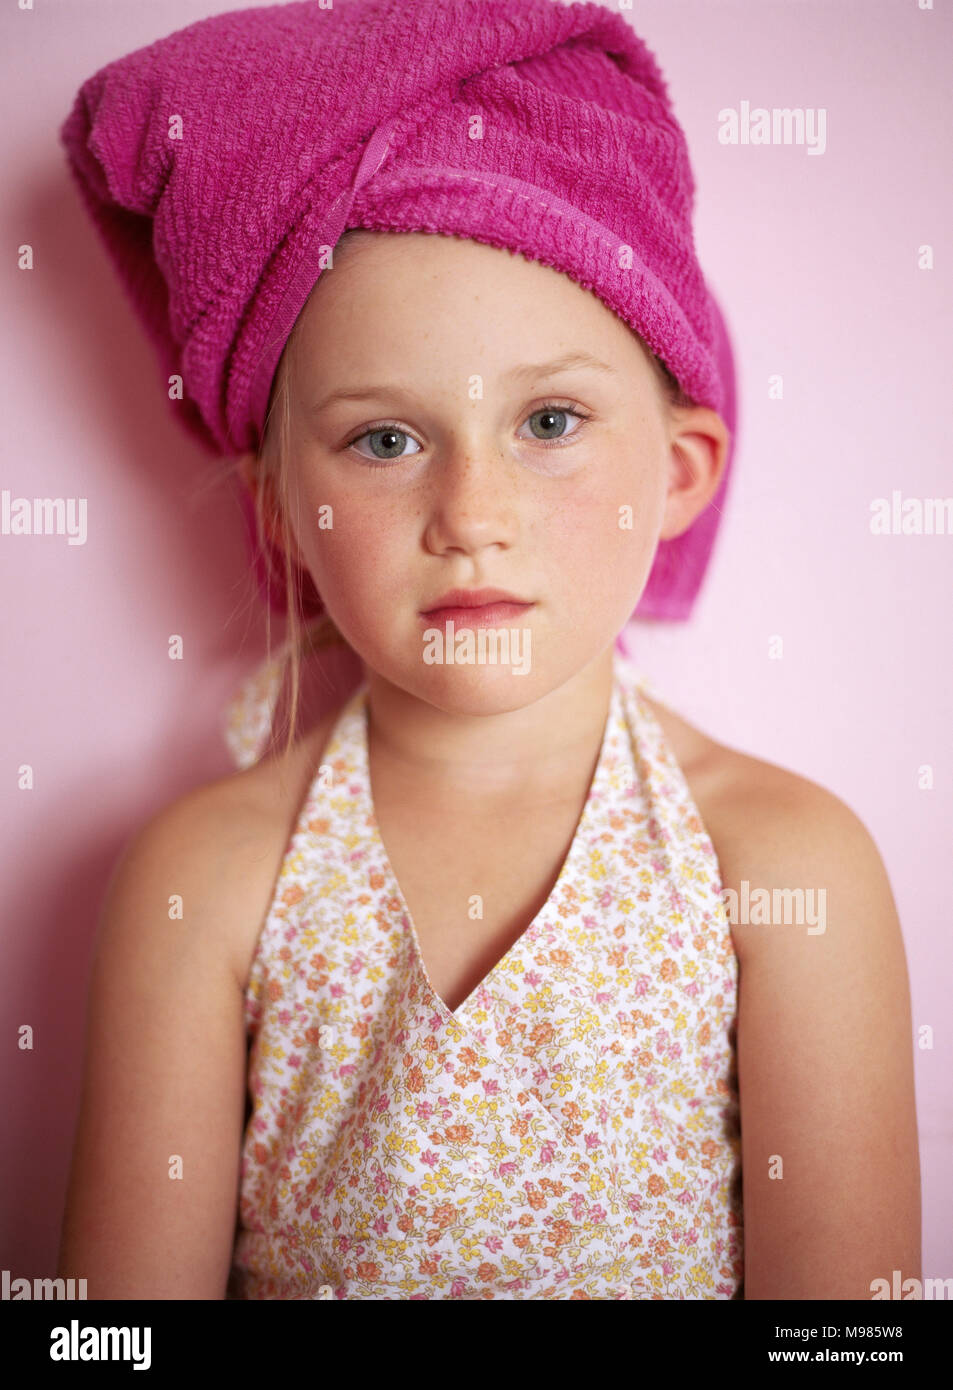 Portrait of little girl wearing pink towel turban Banque D'Images